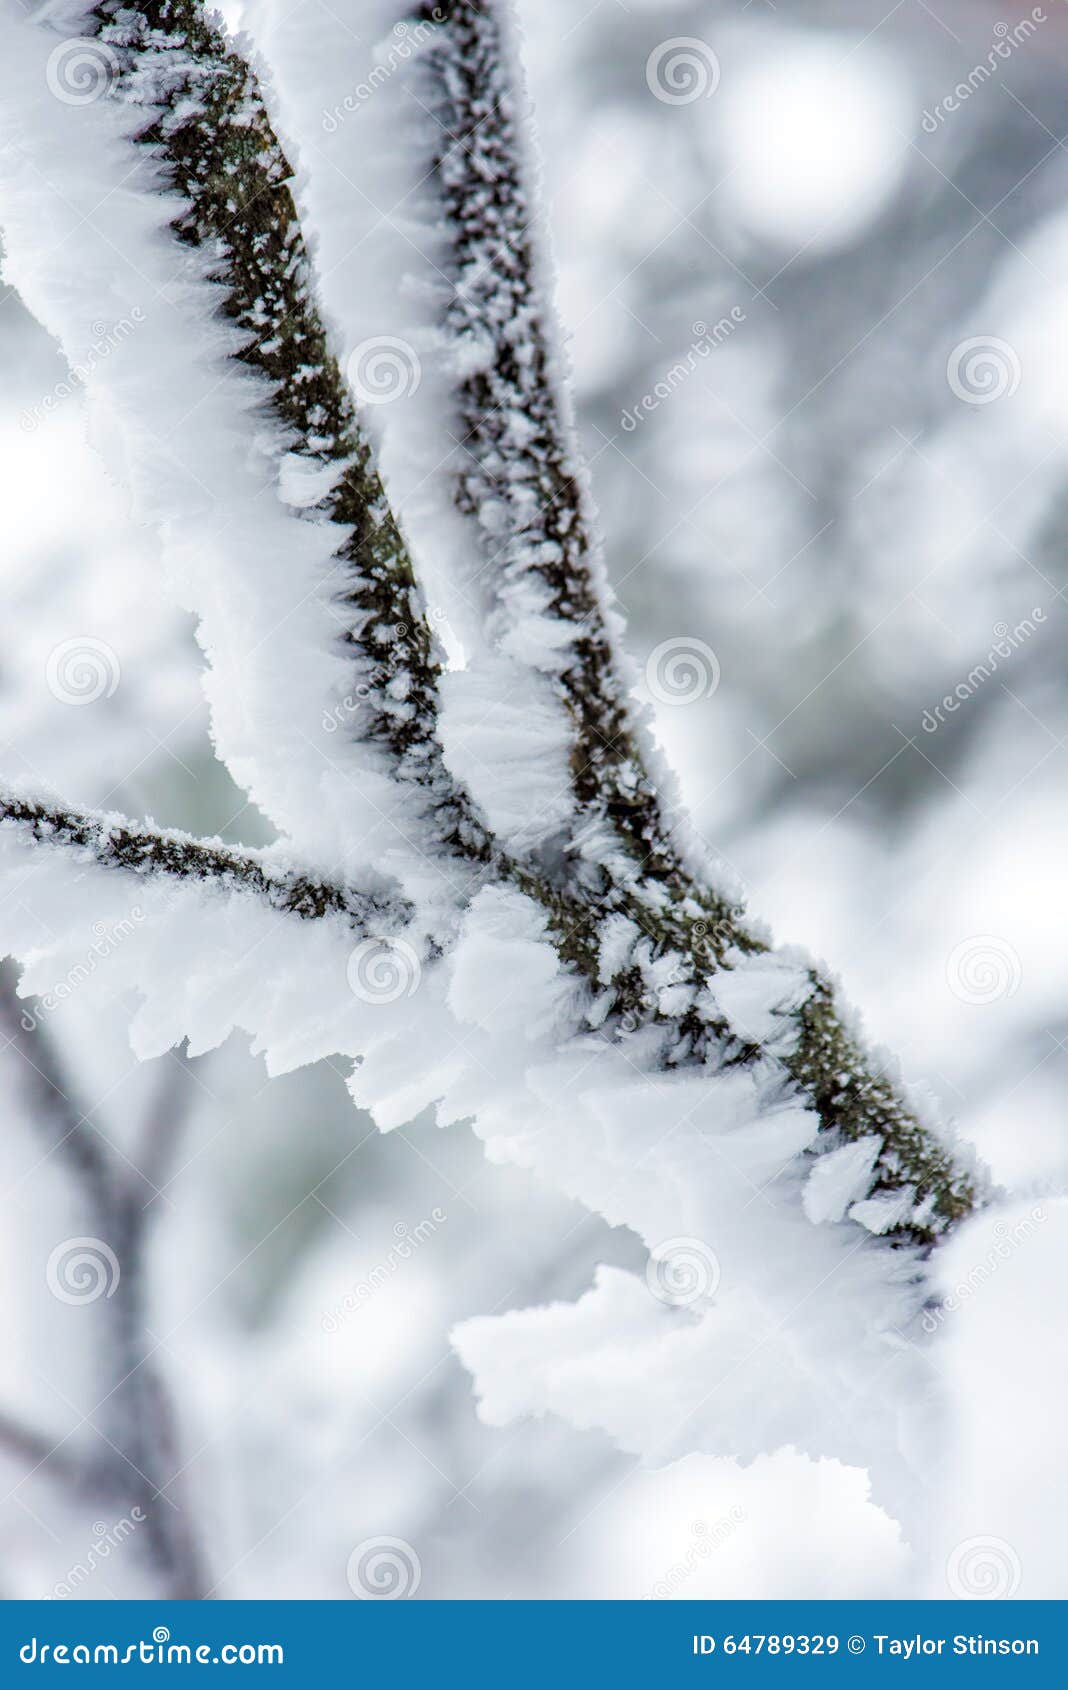 Snow Collected on a Branch stock image. Image of point - 64789329